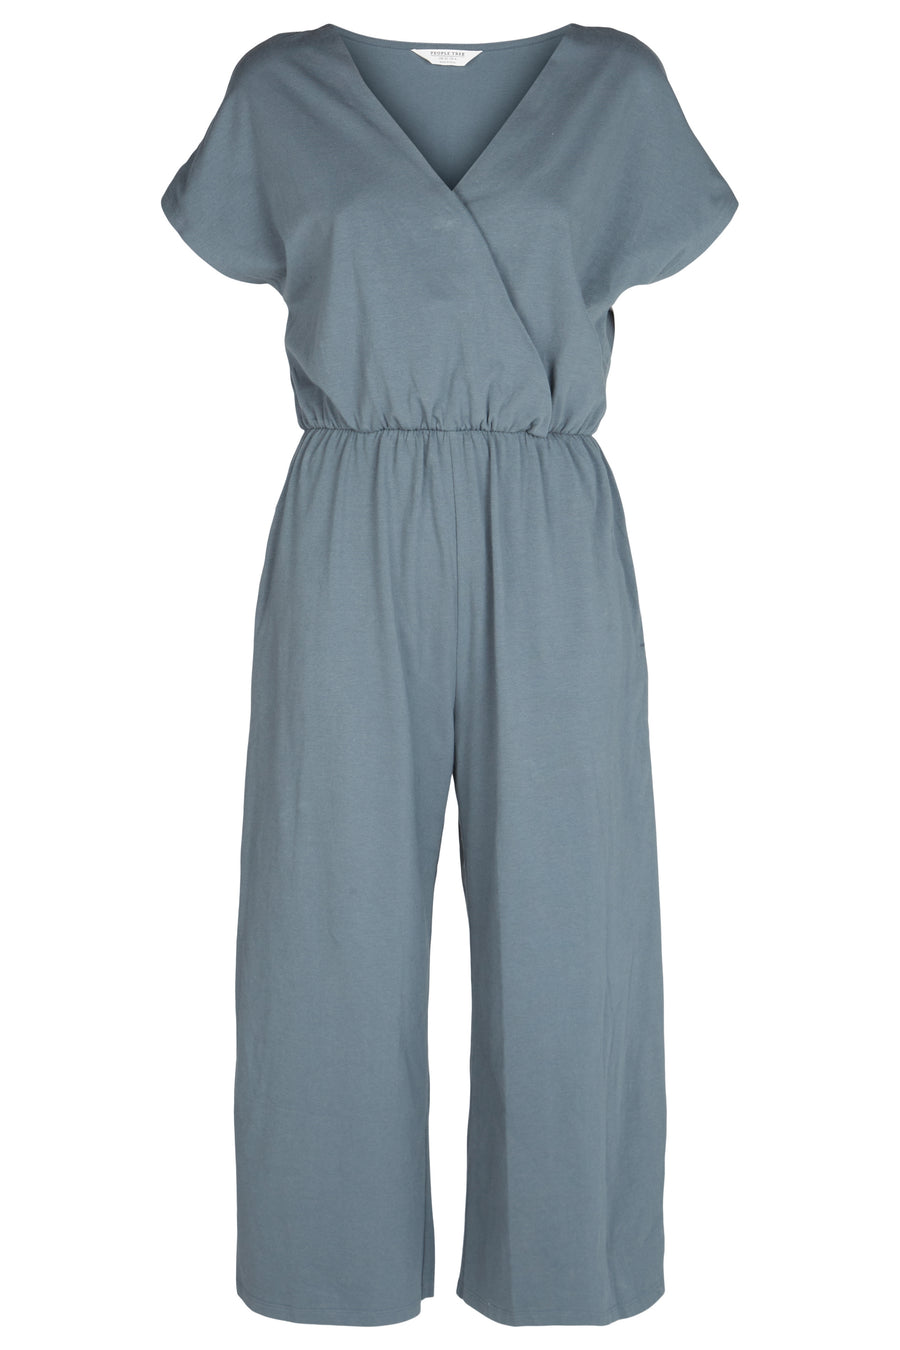 People Tree Fair Trade, Ethical & Sustainable Evelyn Jumpsuit in Dark grey 95% organic certified cotton, 5% elastane